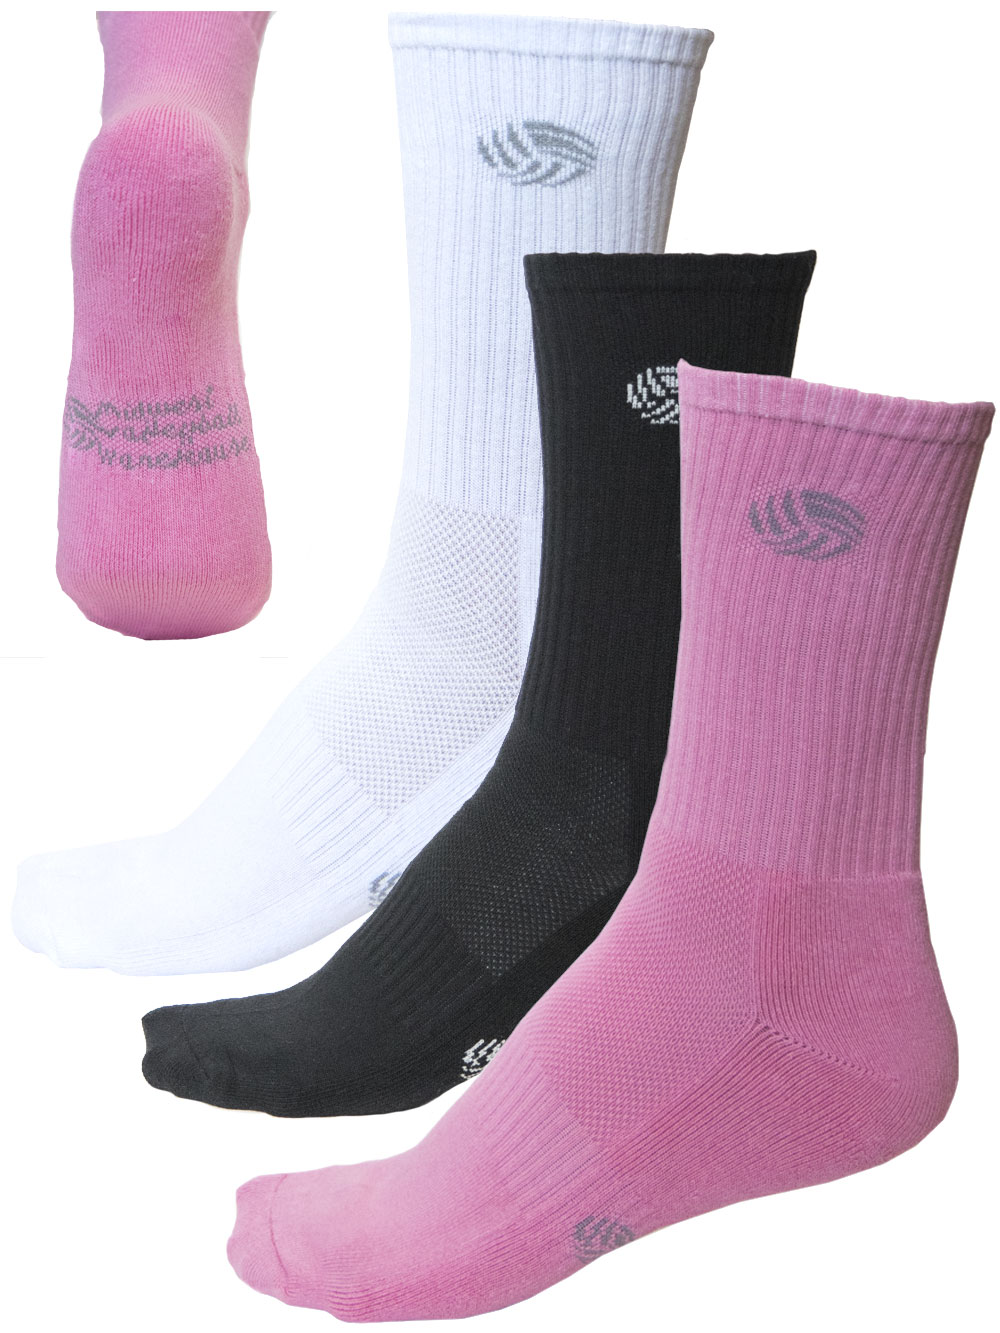 MVW MID Volleyball Sock | Midwest Volleyball